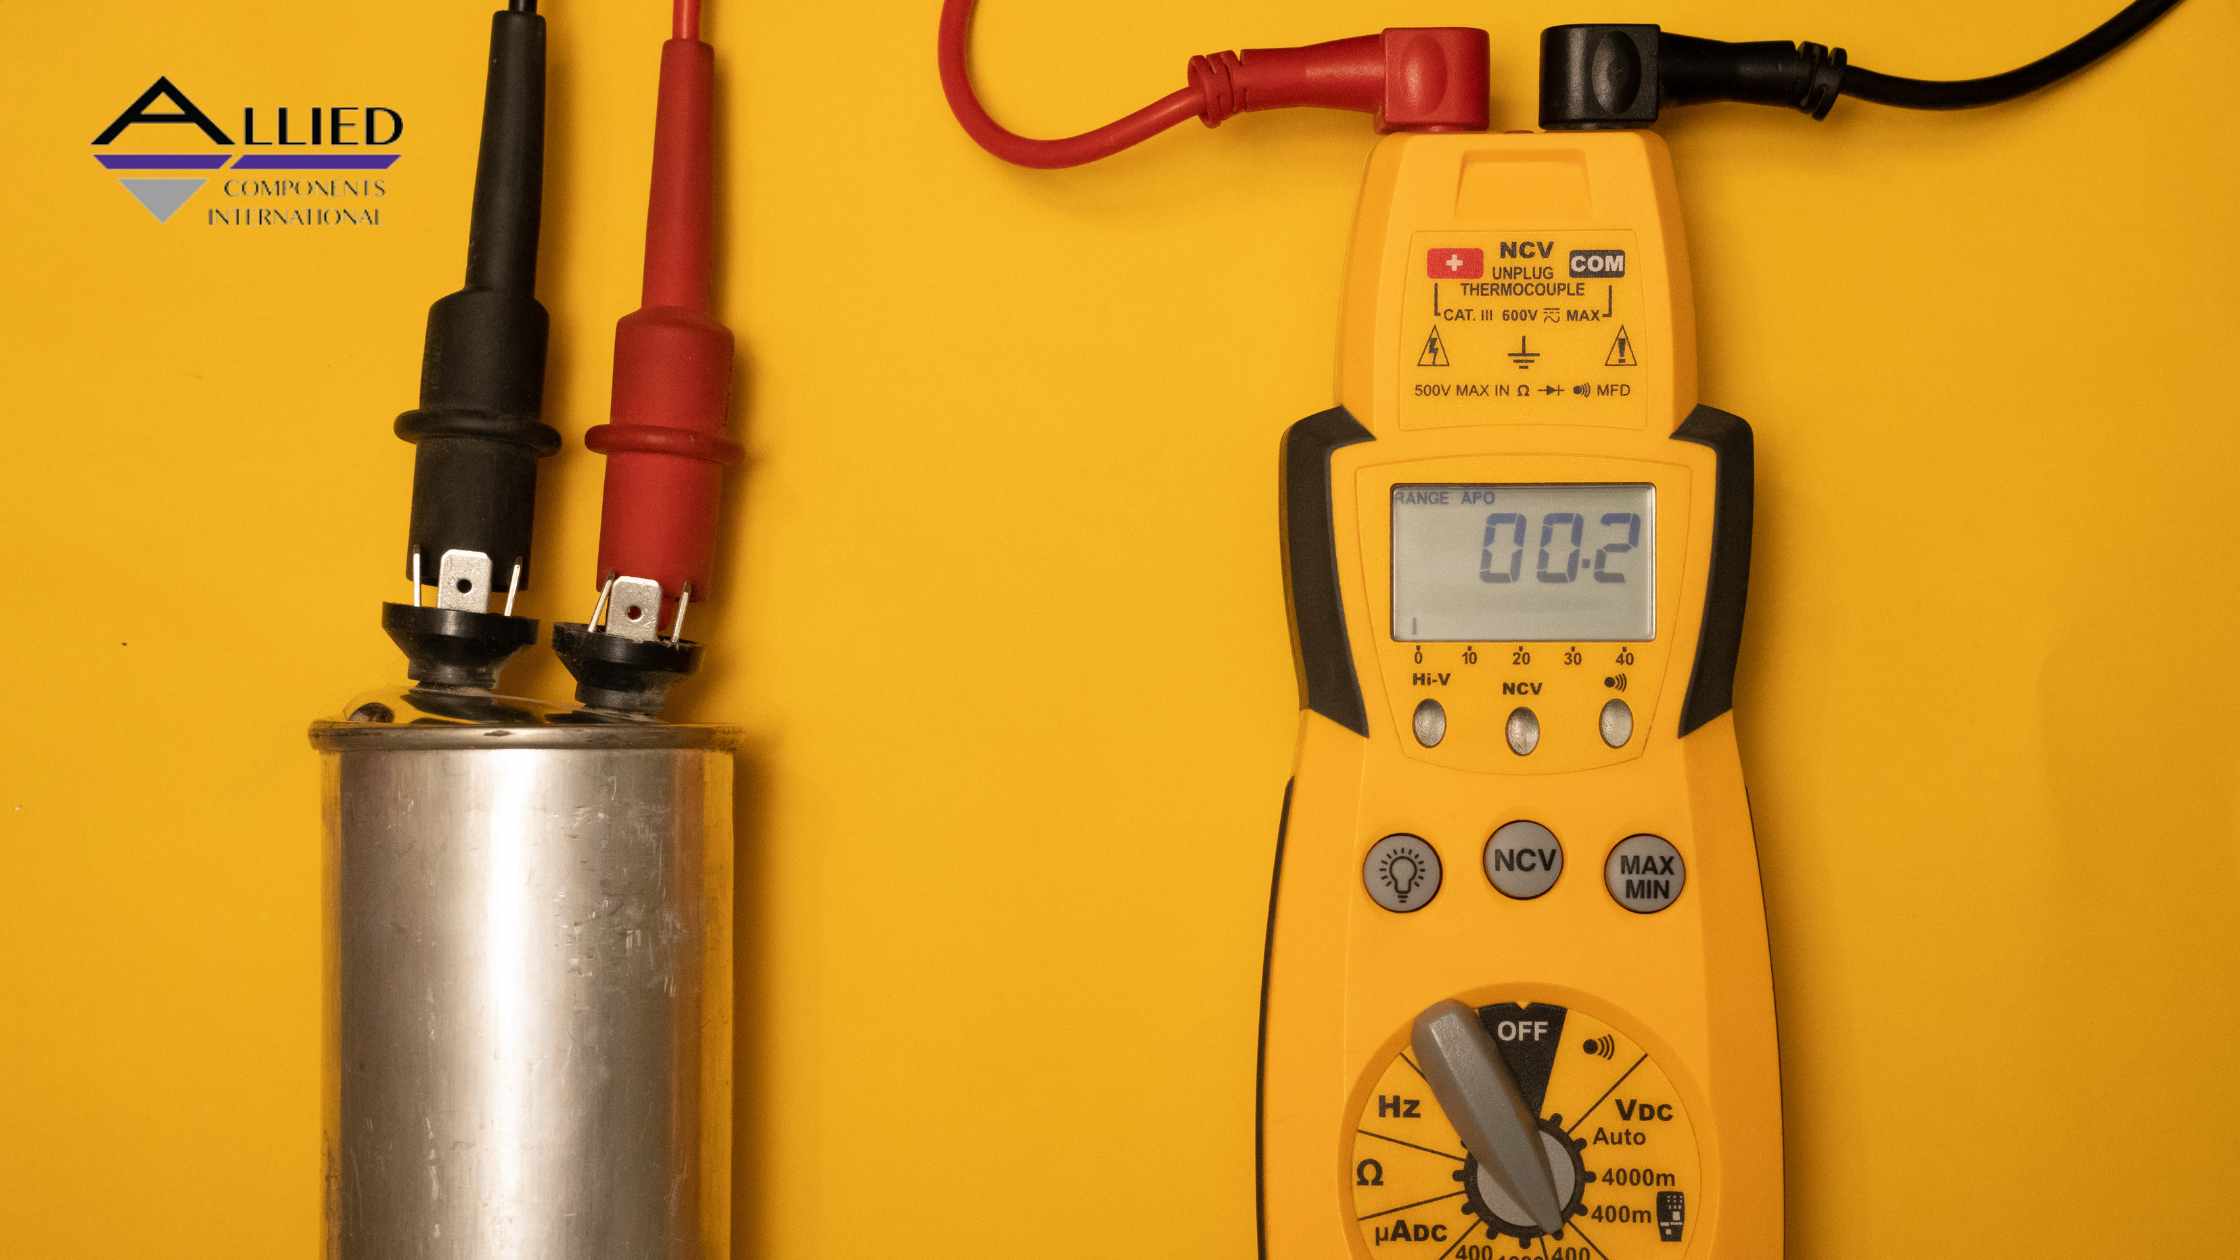 How to Test a Capacitor Using a Multimeter, an Ohm Meter, and a Volt Meter?